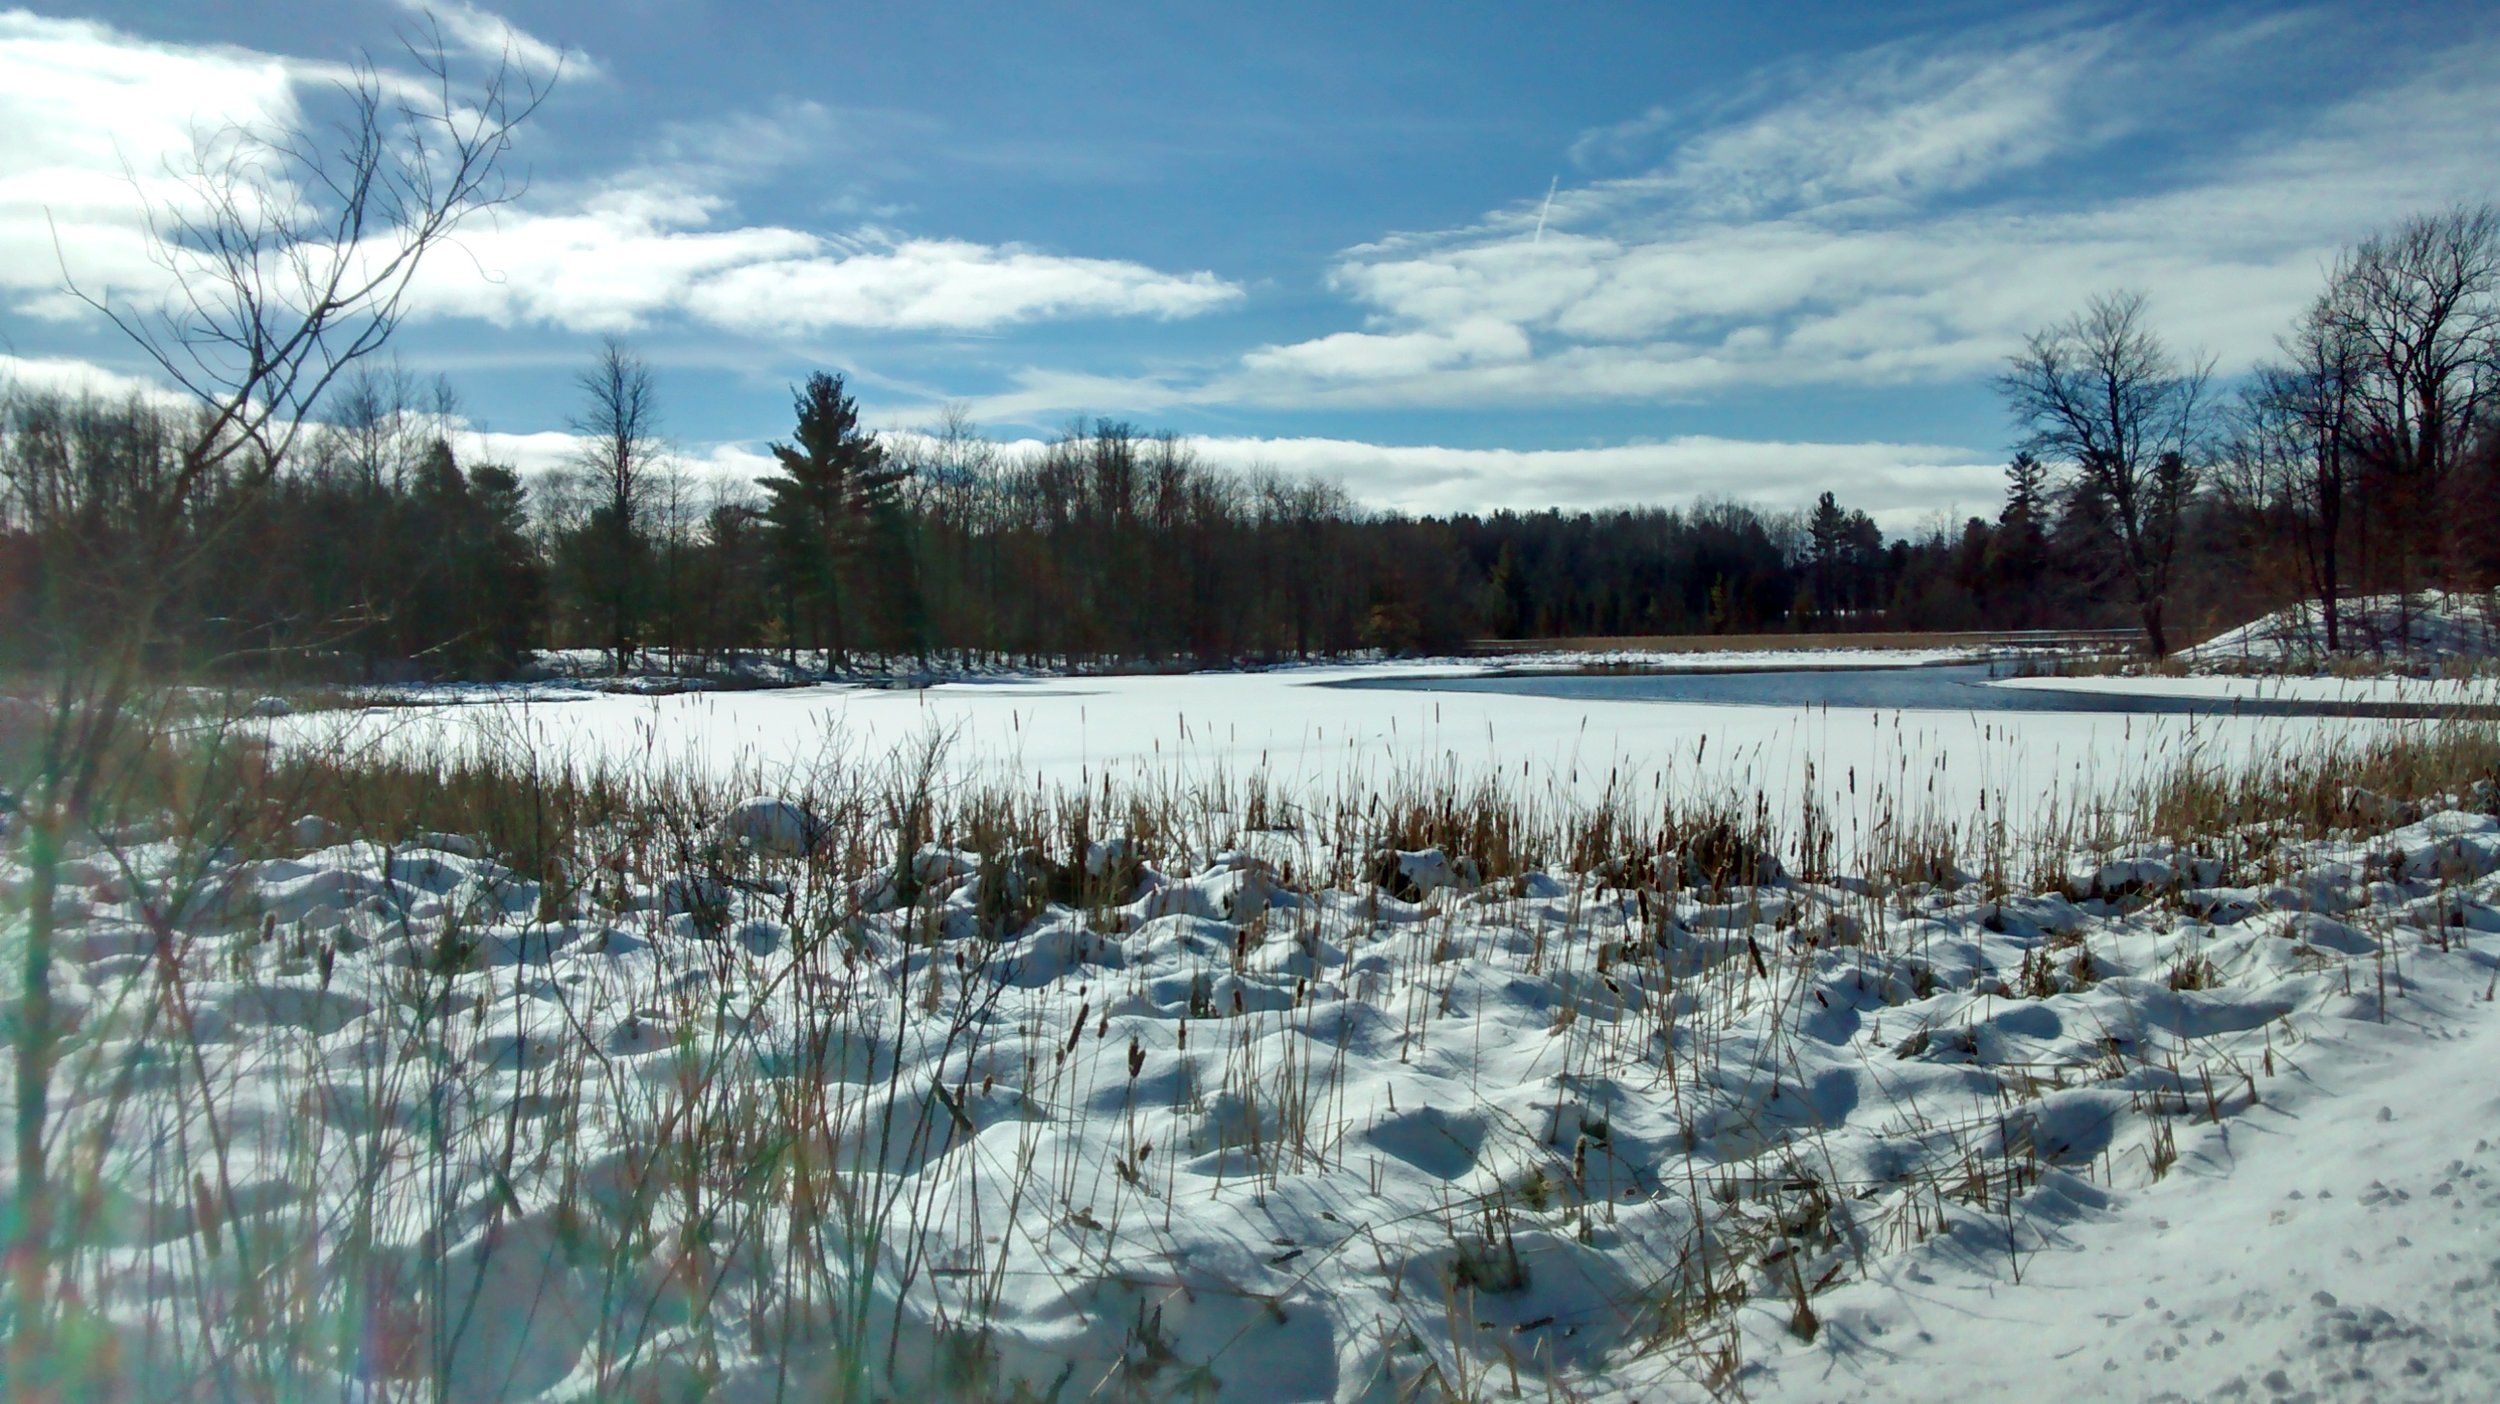 February at Gales Pond